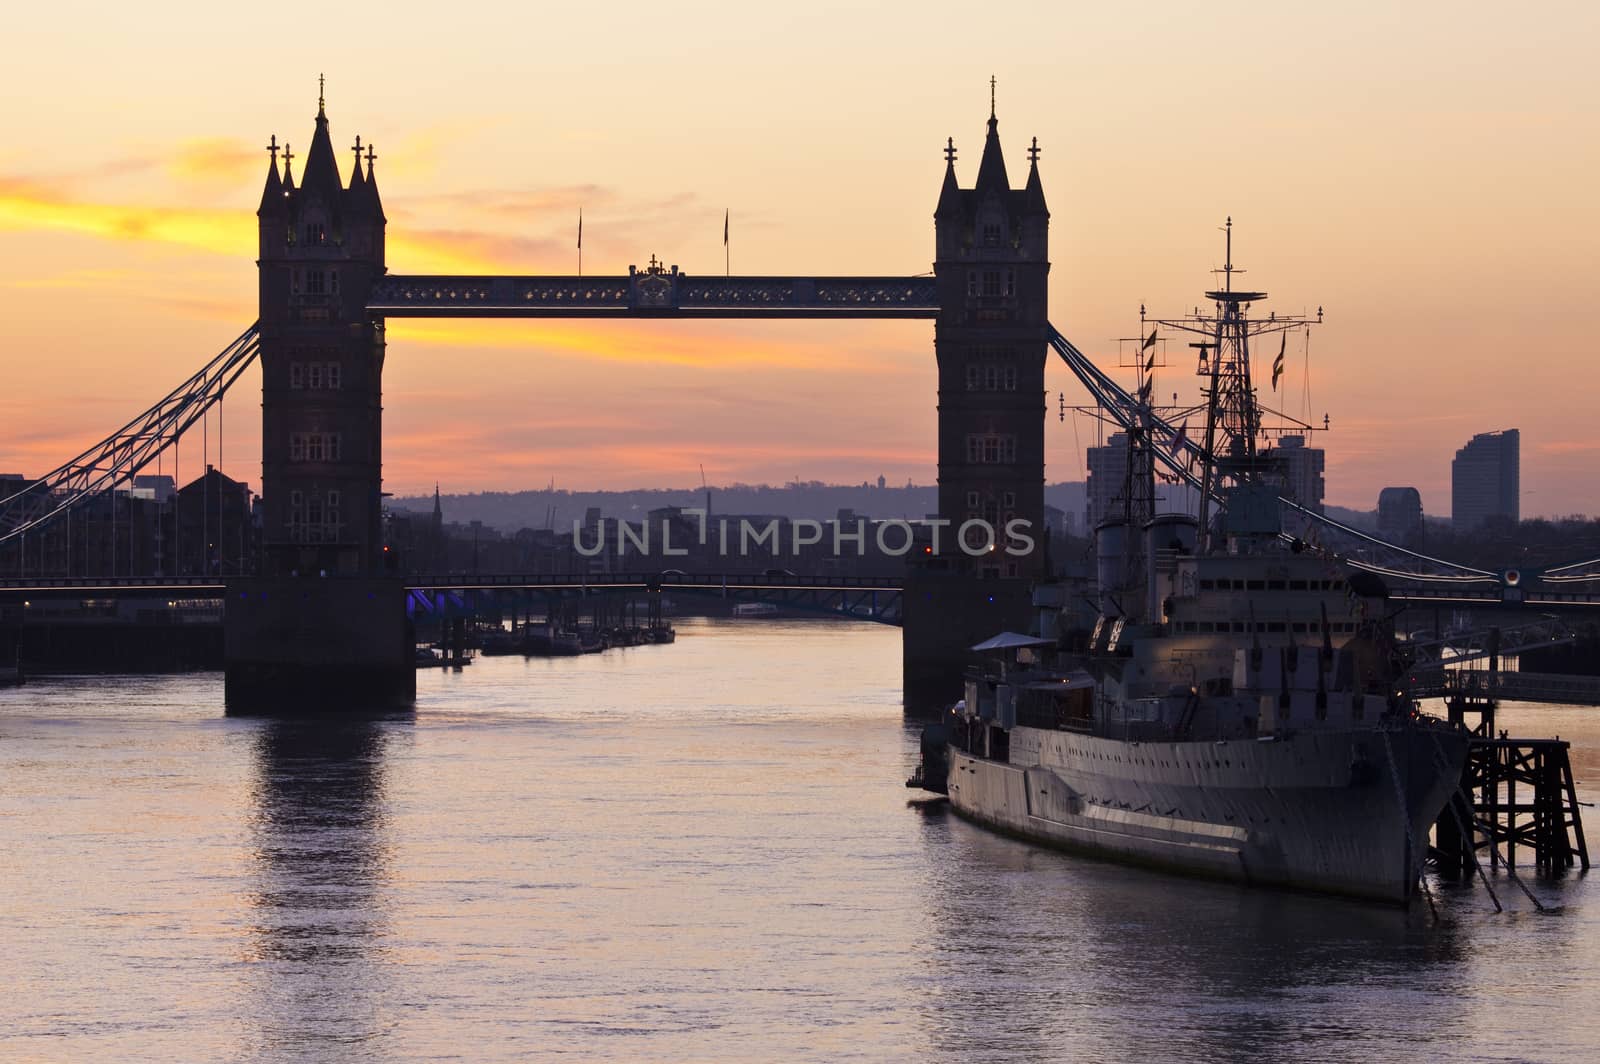 The beautiful sunrise behind Tower Bridge and the HMS Belfast in London.